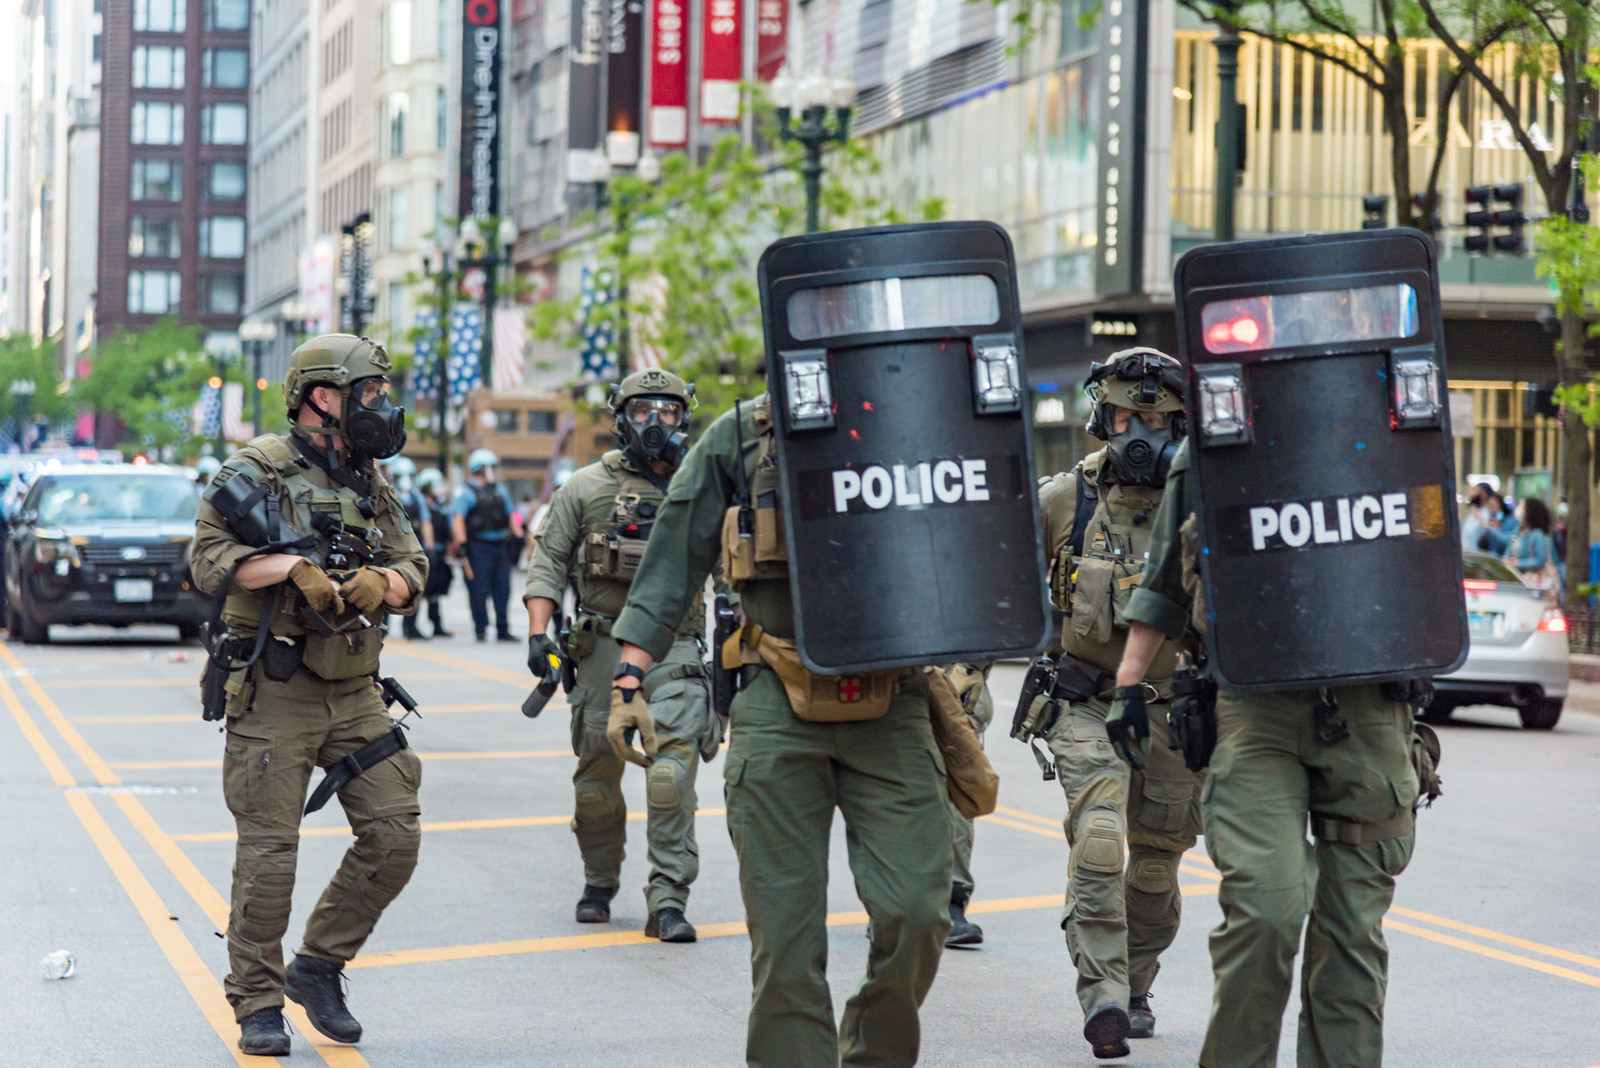 Militarized policing is threatening democracy